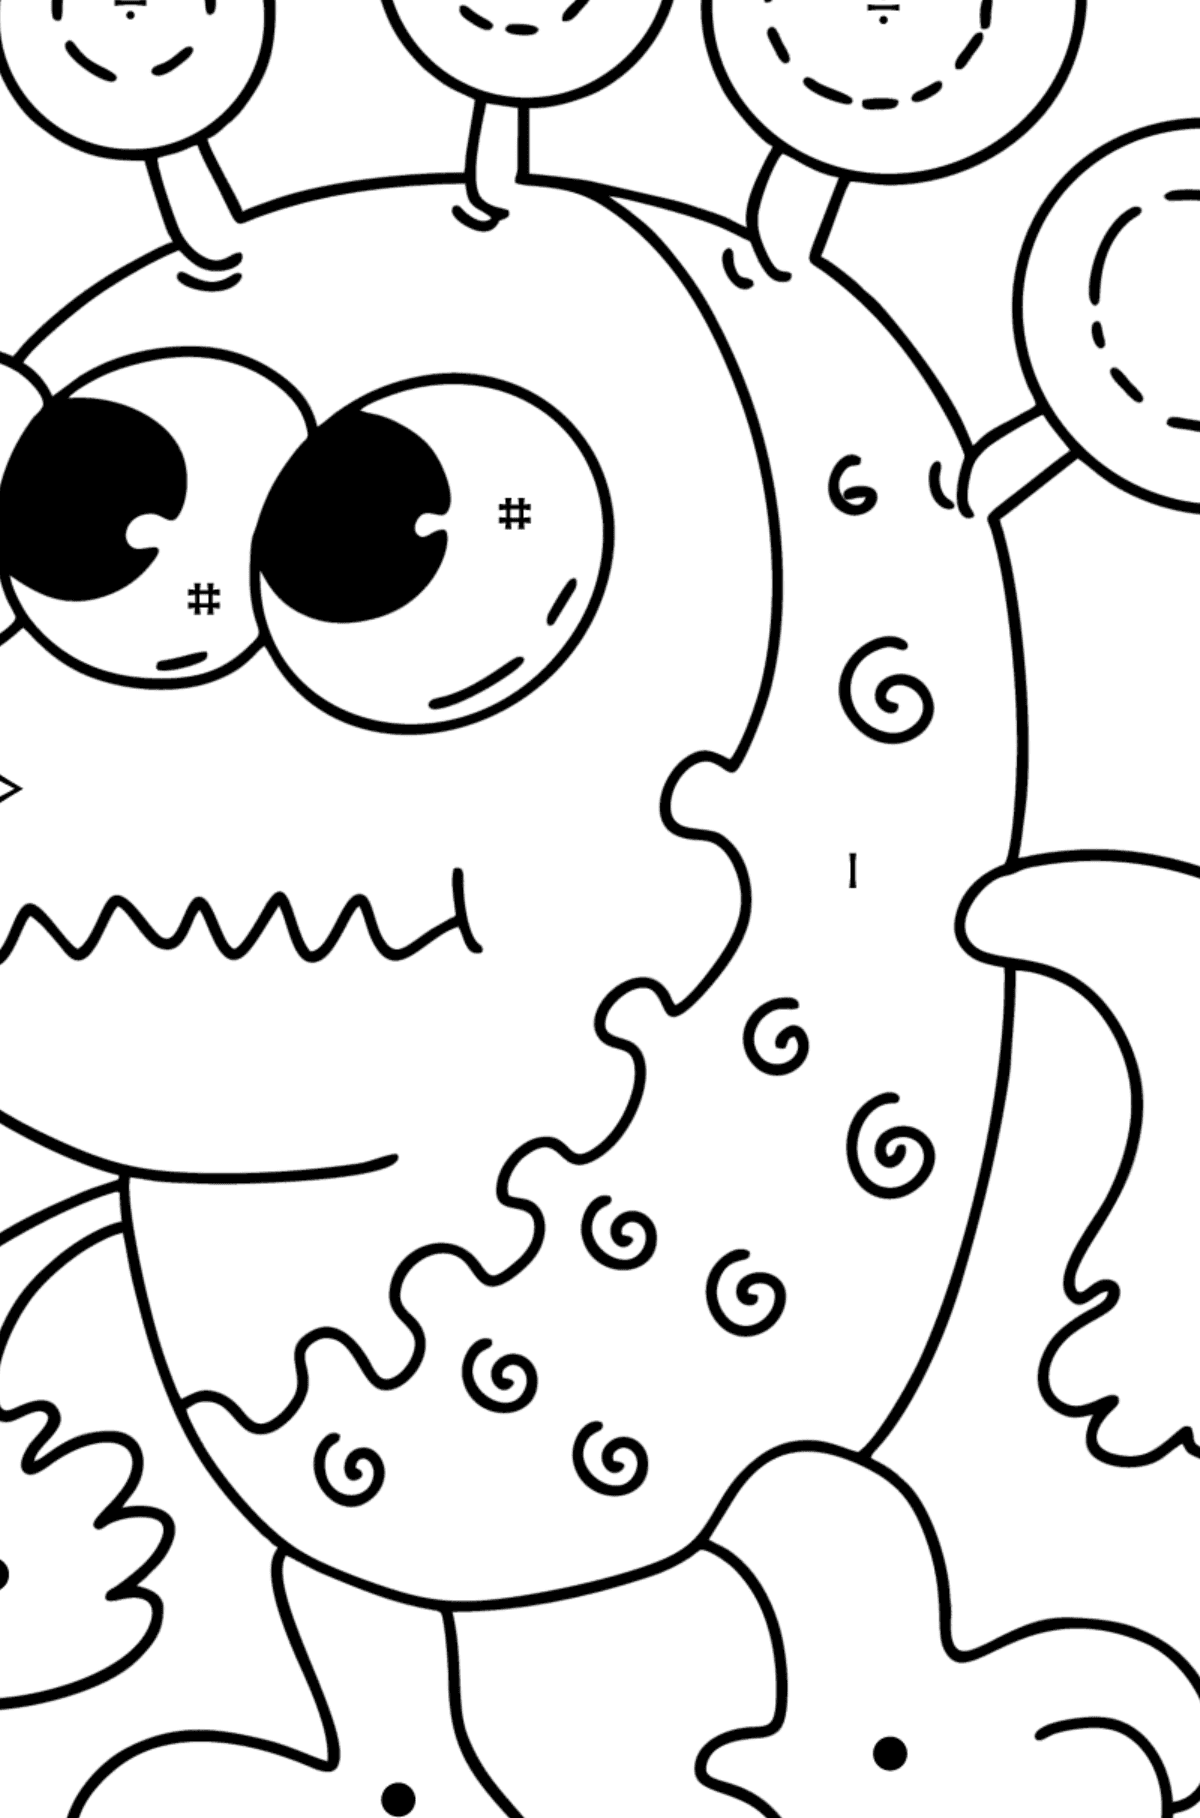 Funny Alien Coloring page - Coloring by Symbols for Kids